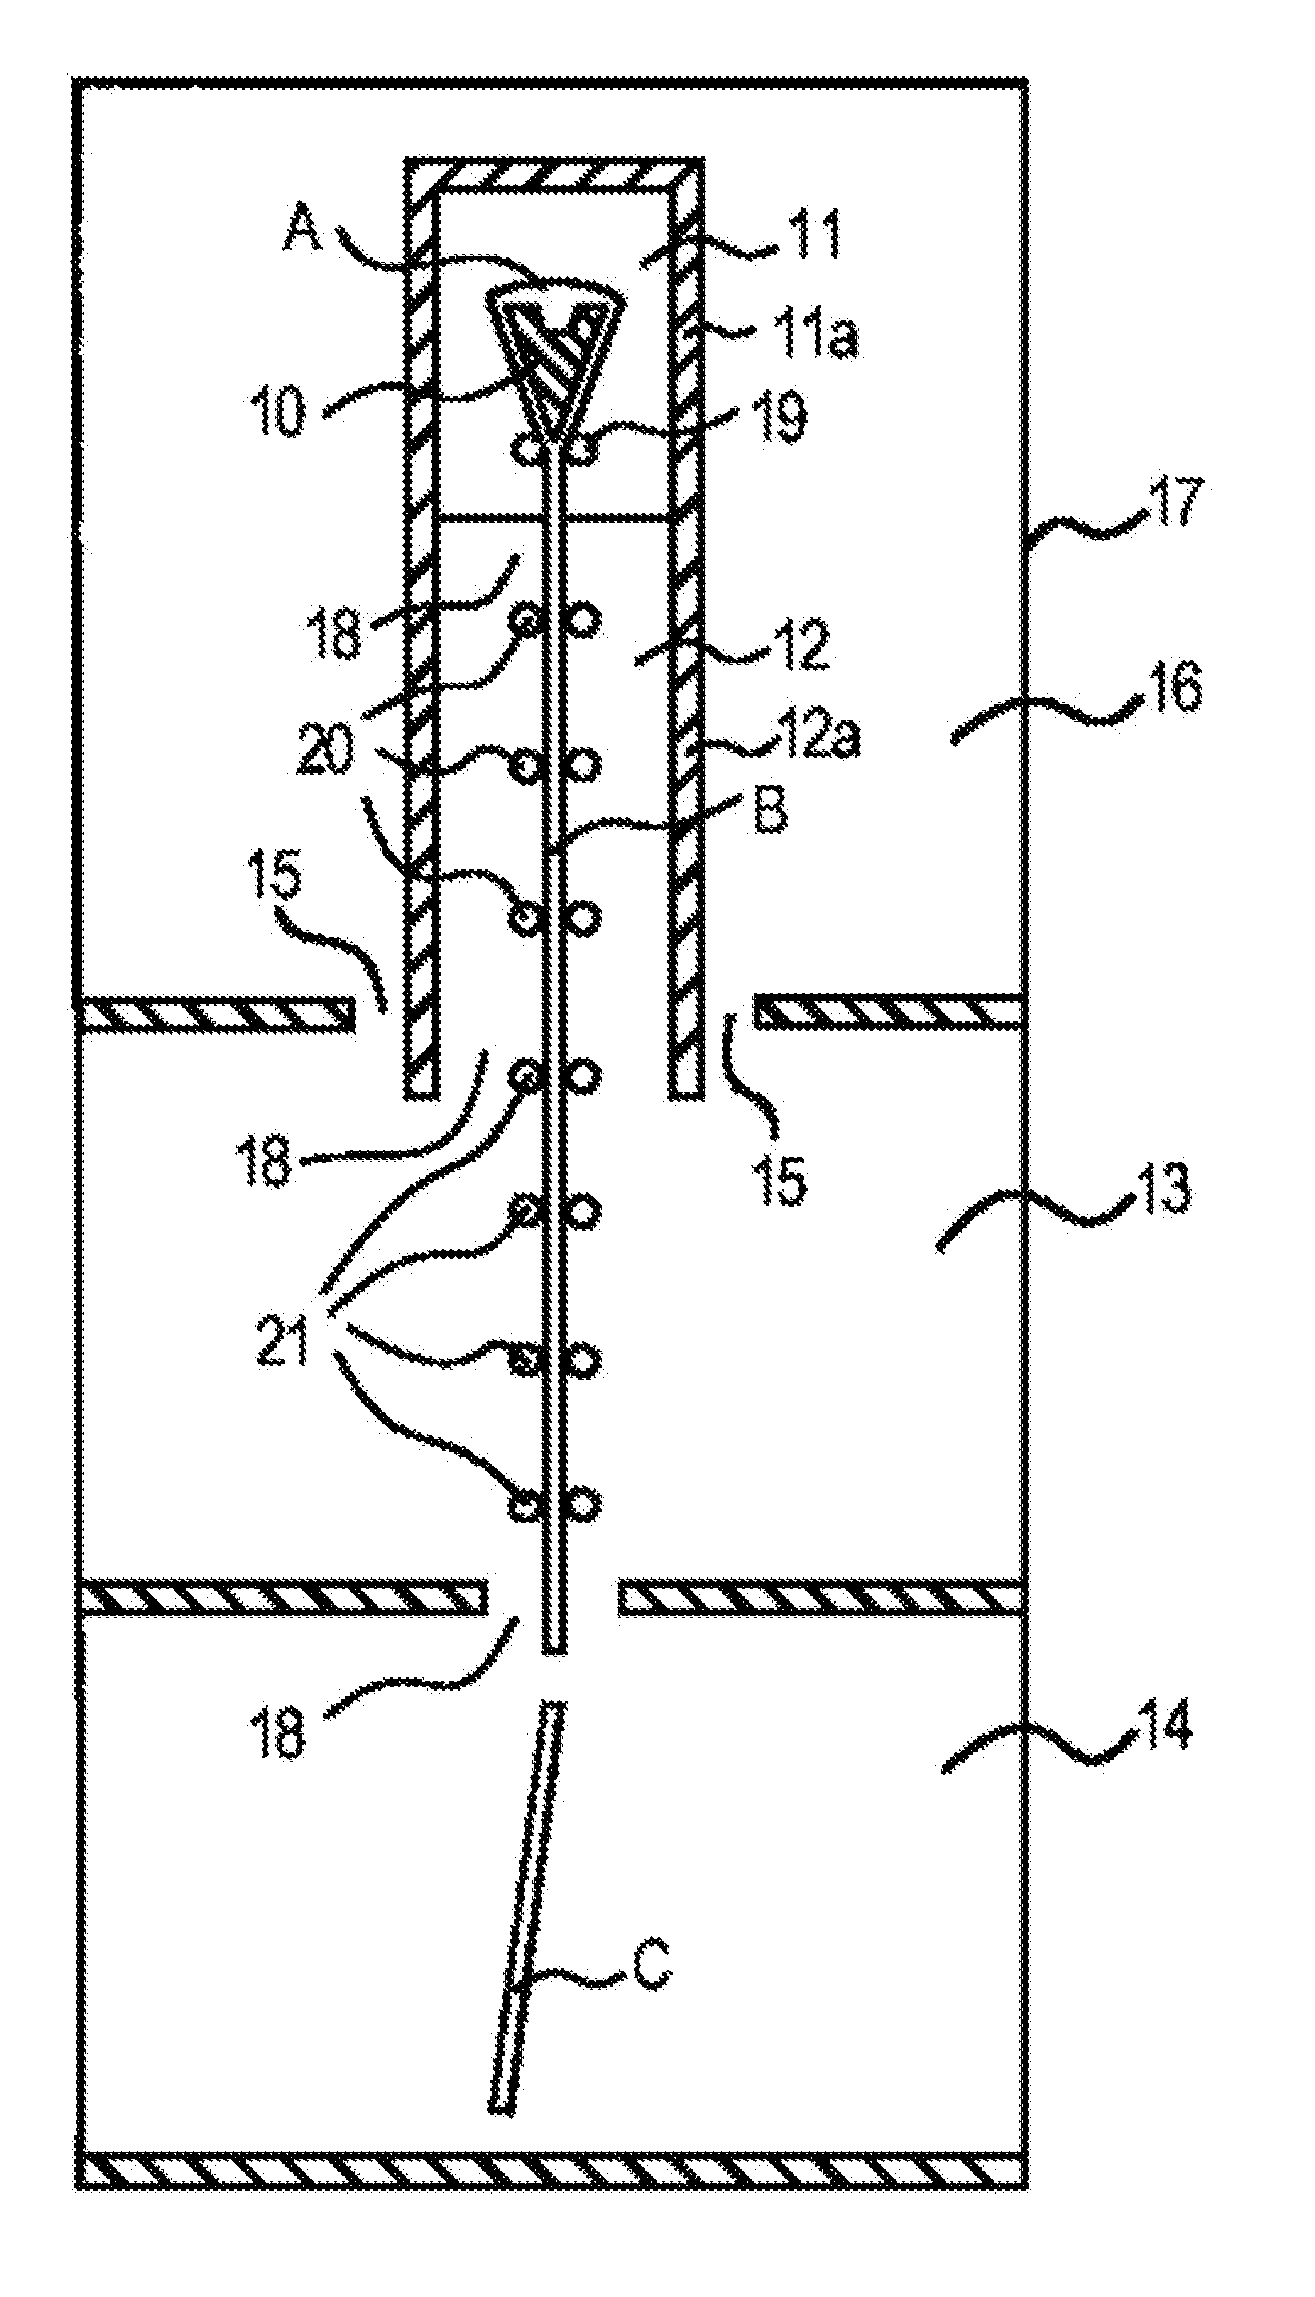 Process and apparatus for producing glass sheet